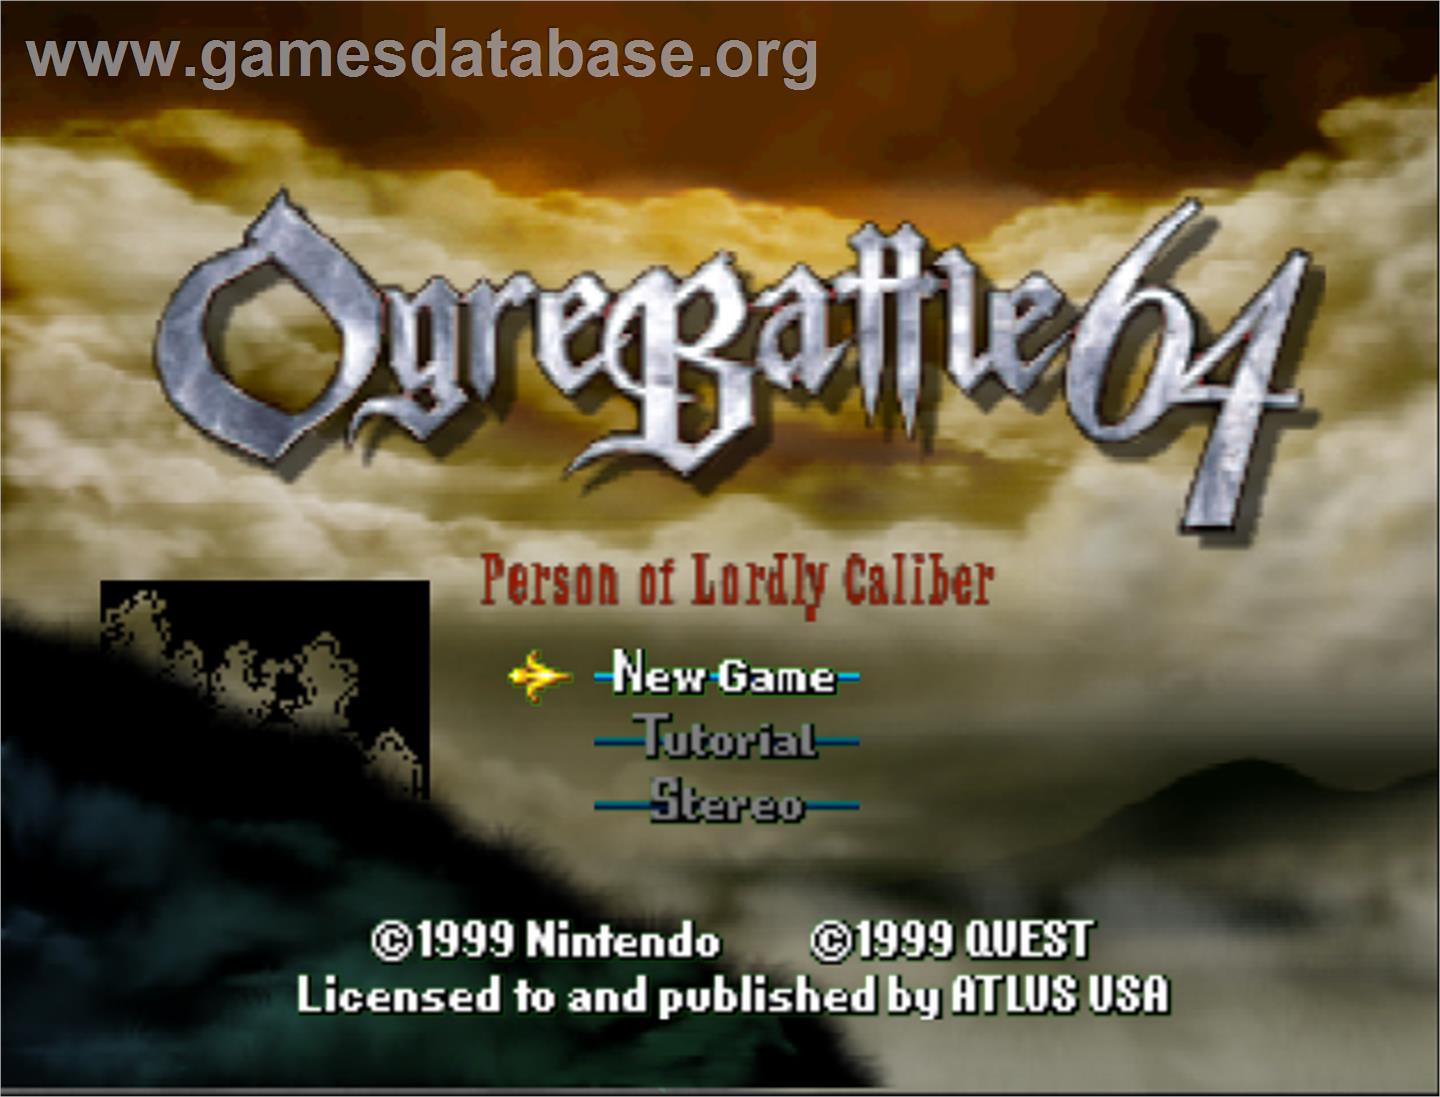 Ogre Battle 64: Person of Lordly Caliber - Nintendo N64 - Artwork - Title Screen